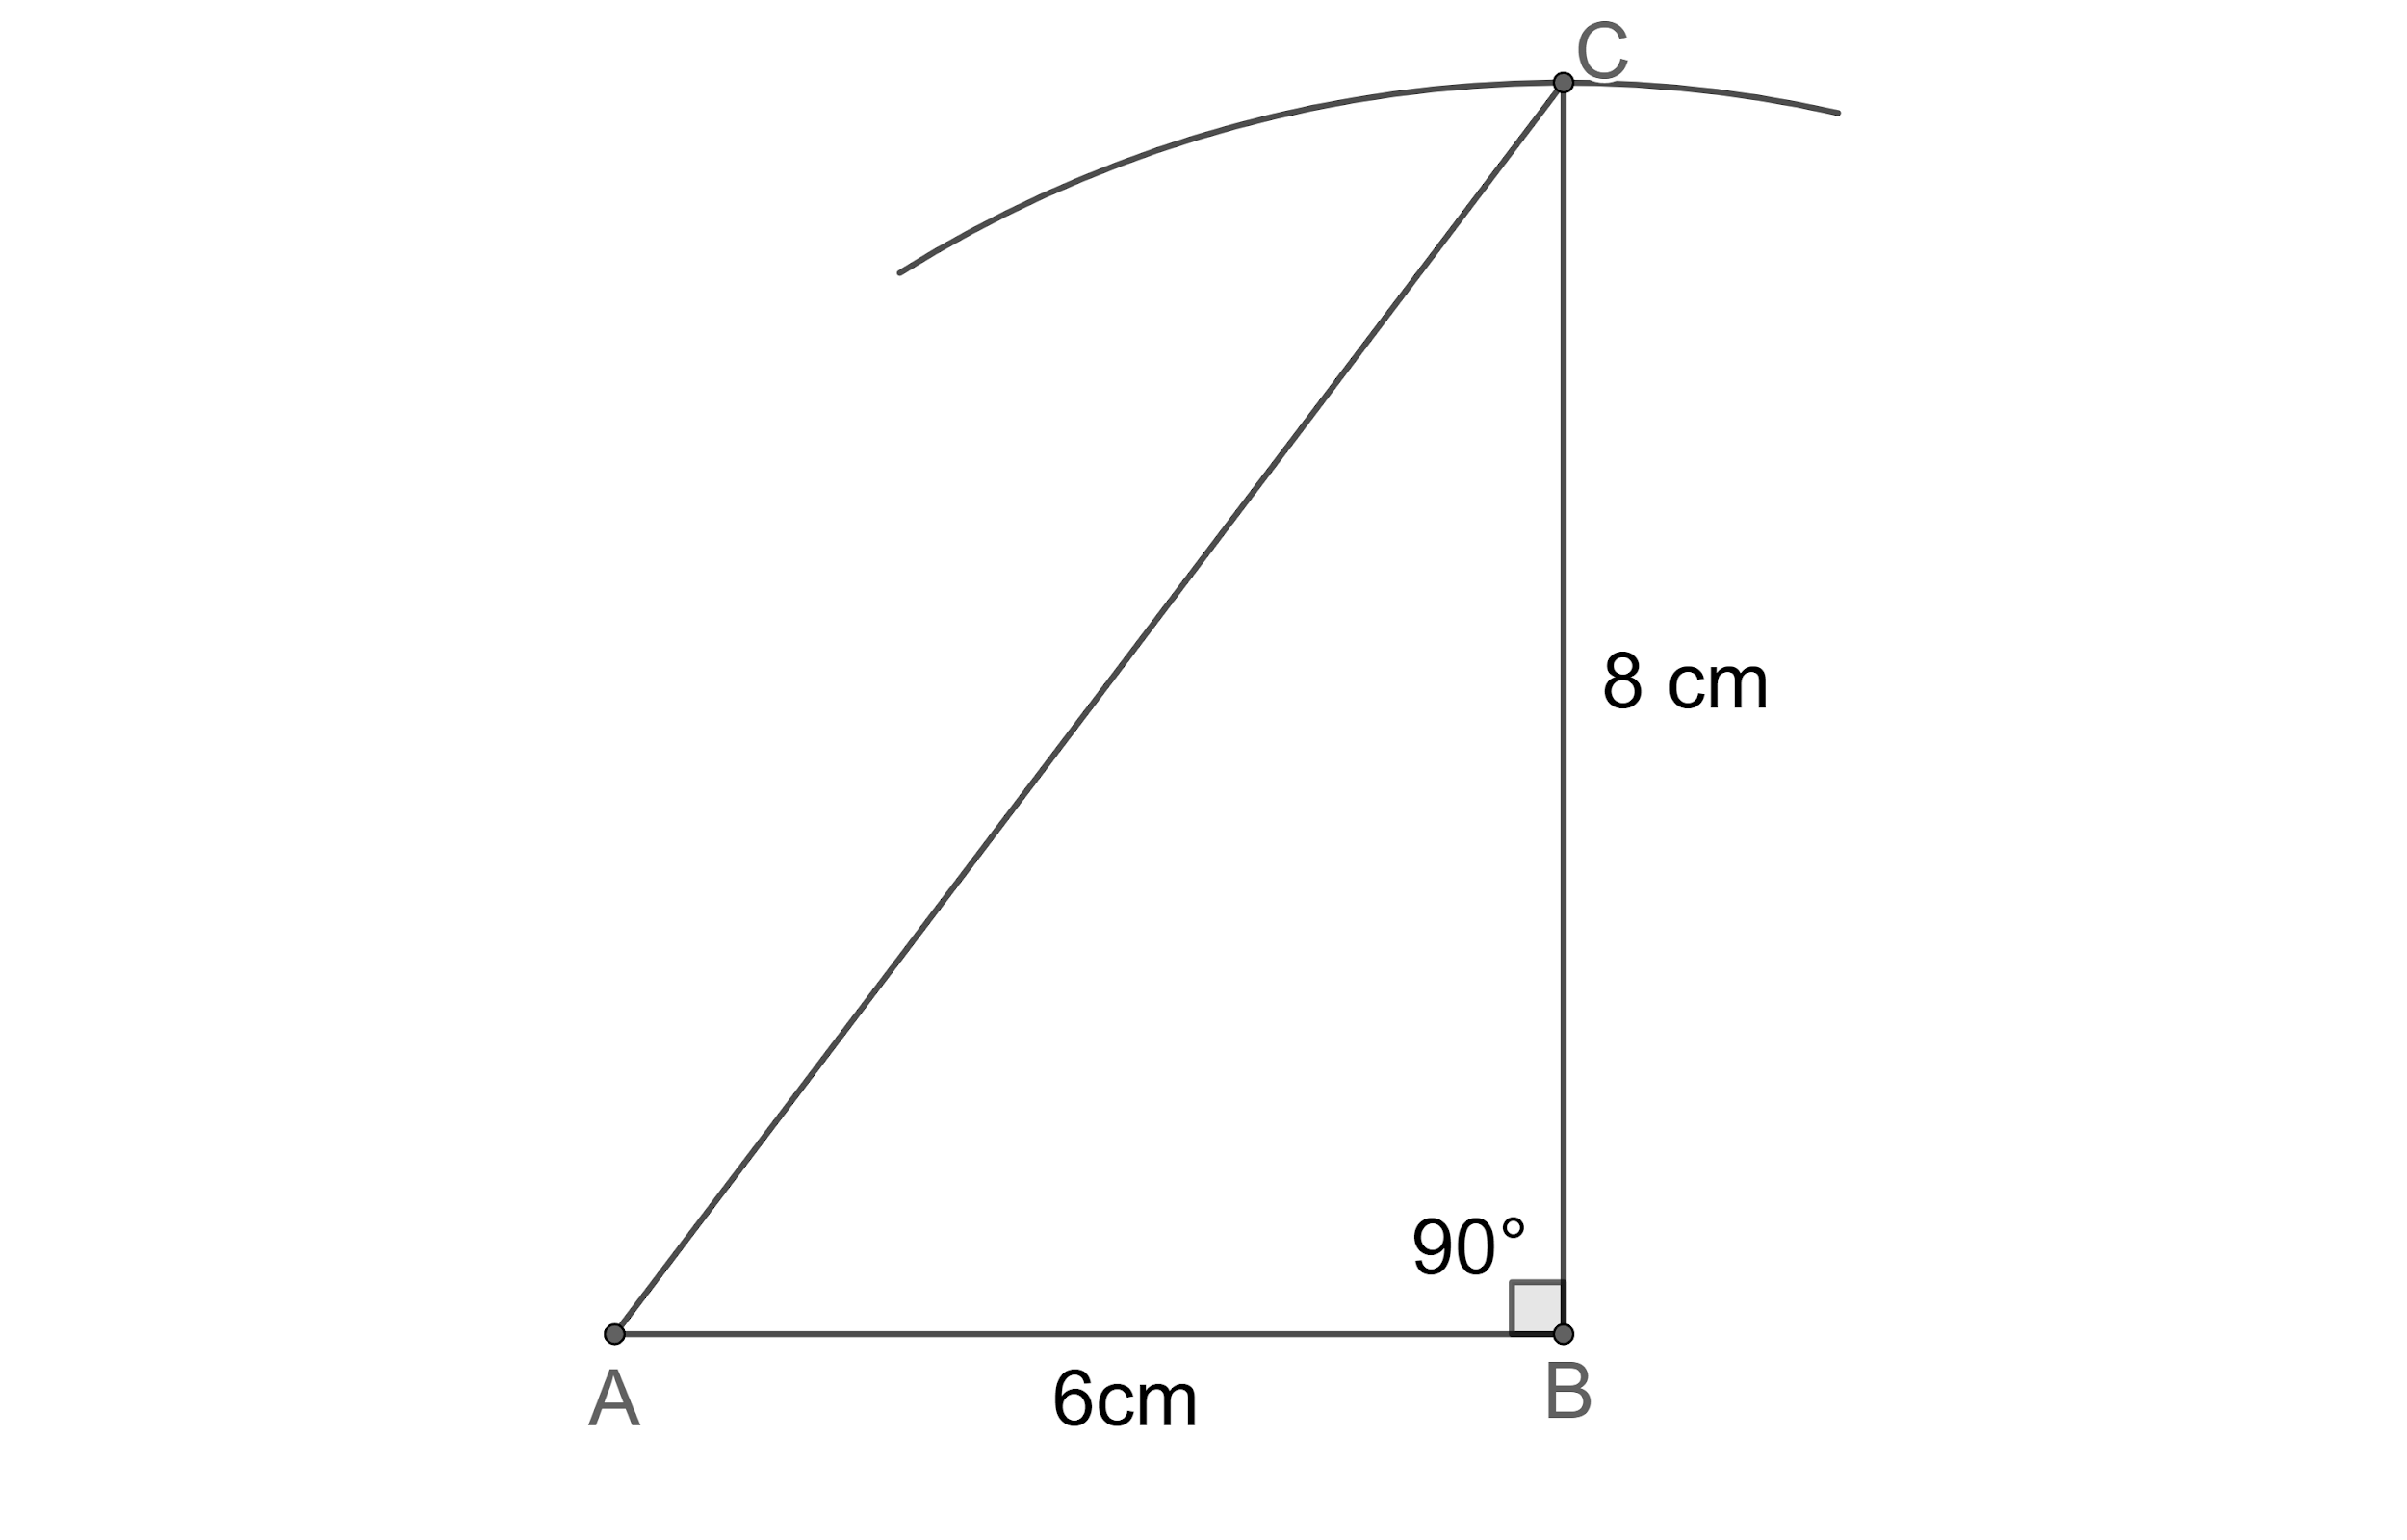 Draw a right triangle ABC in which \\[AB=6cm\\], BC=8cm and \\angle